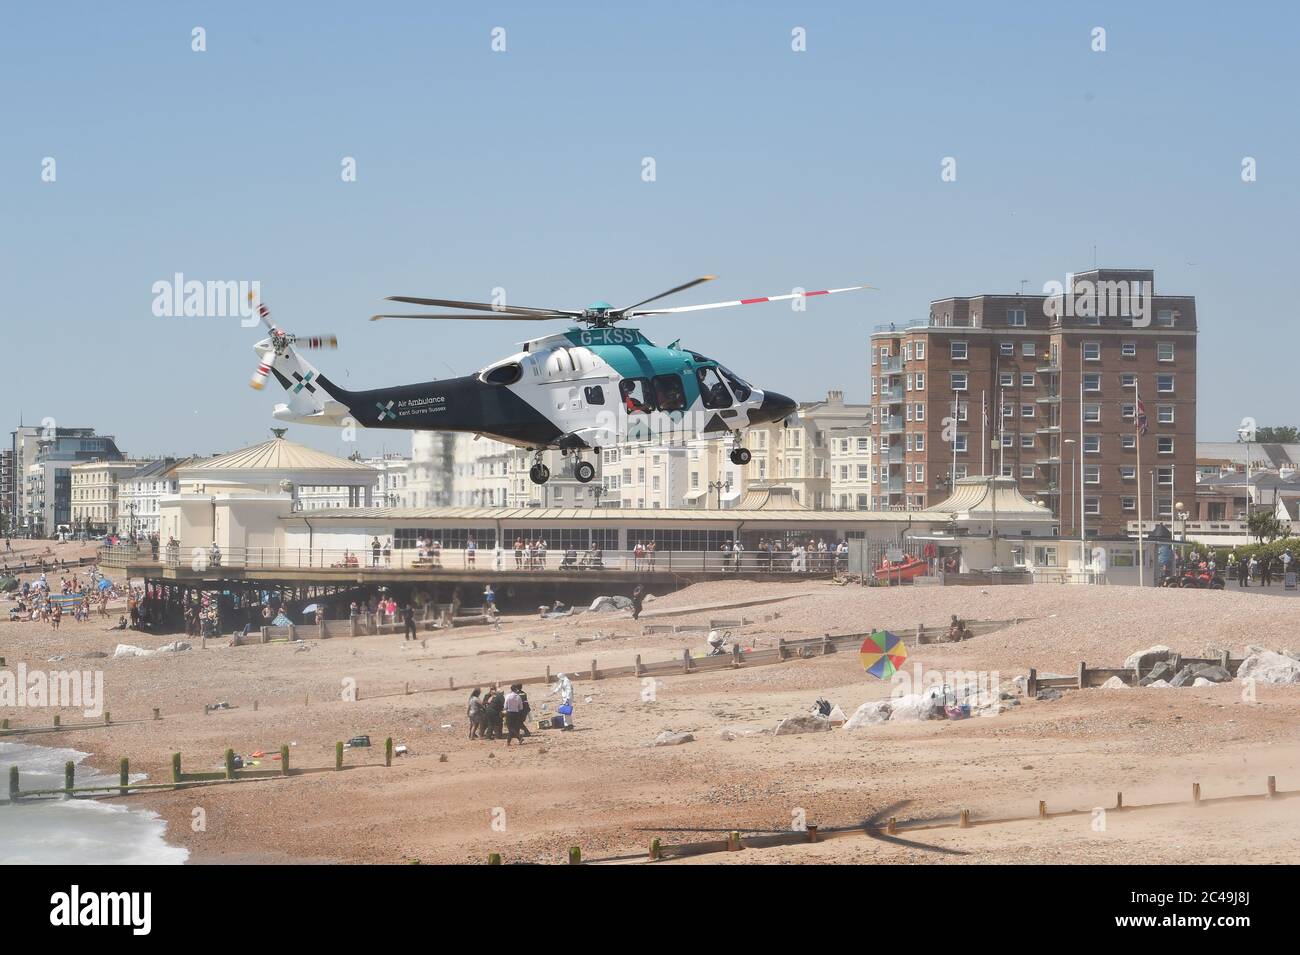 Worthing UK 25th June 2020 - An Air Ambulance lands on Worthing beach today as it attends an incident with the emergency services. Police have said that a woman believed to be in her 50s has died after suffering a medical incident on the beach  : Credit Simon Dack / Alamy Live News Stock Photo